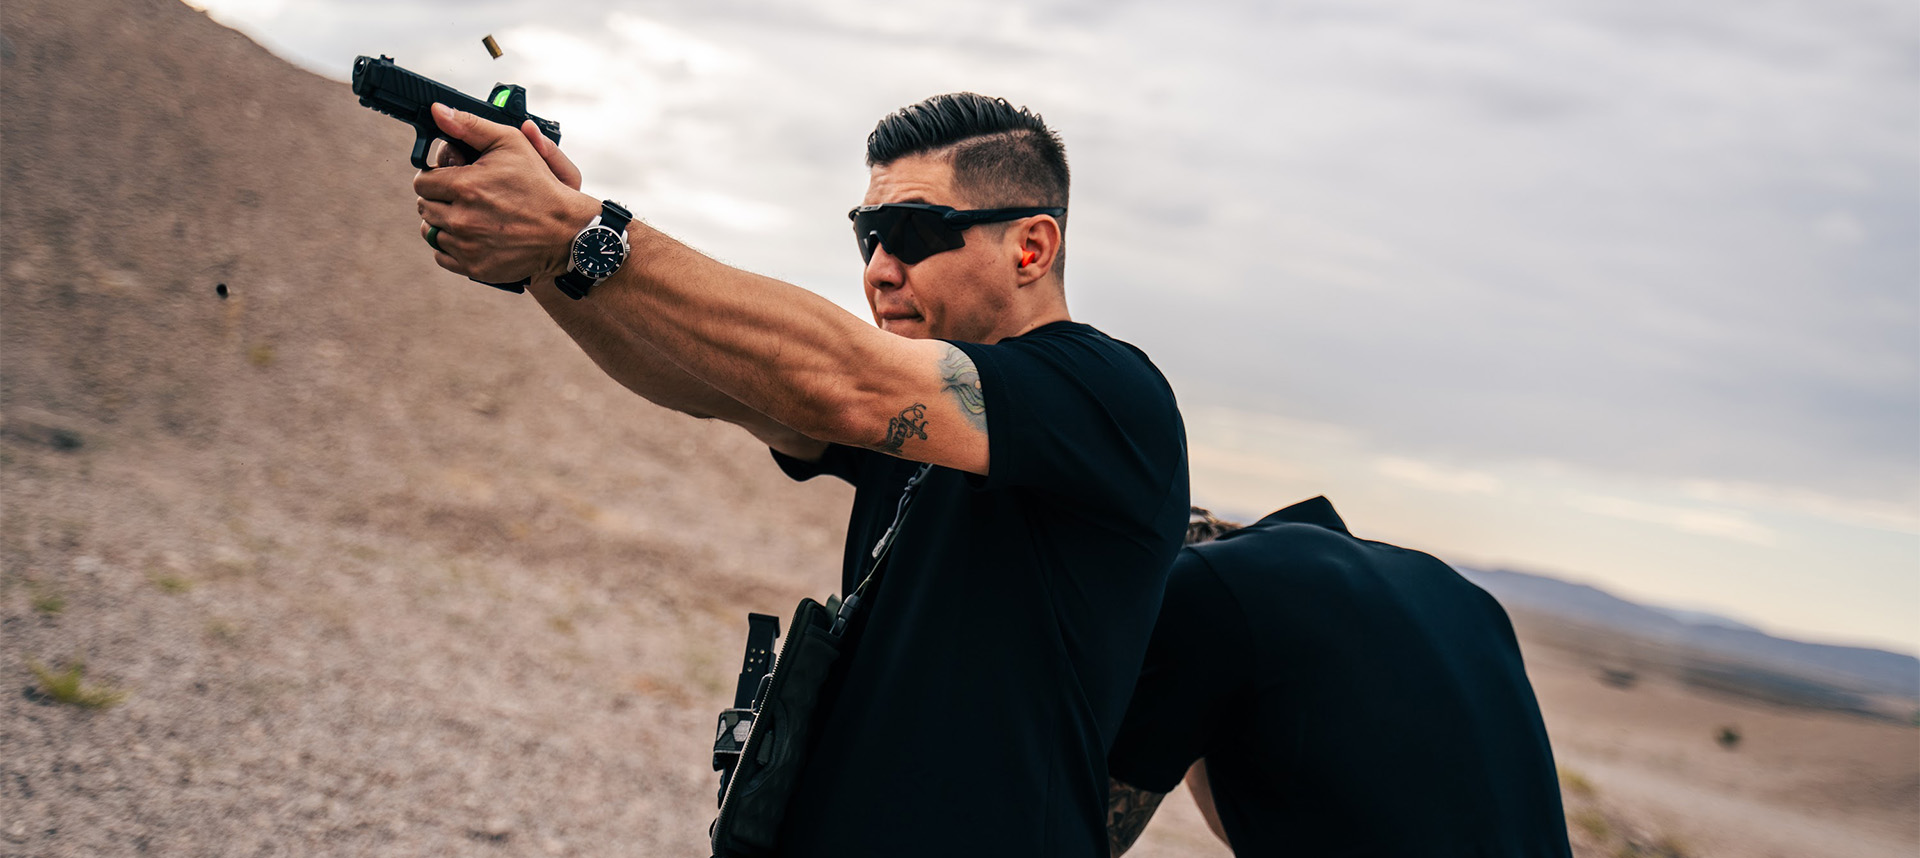 Client movement tactics in close protection